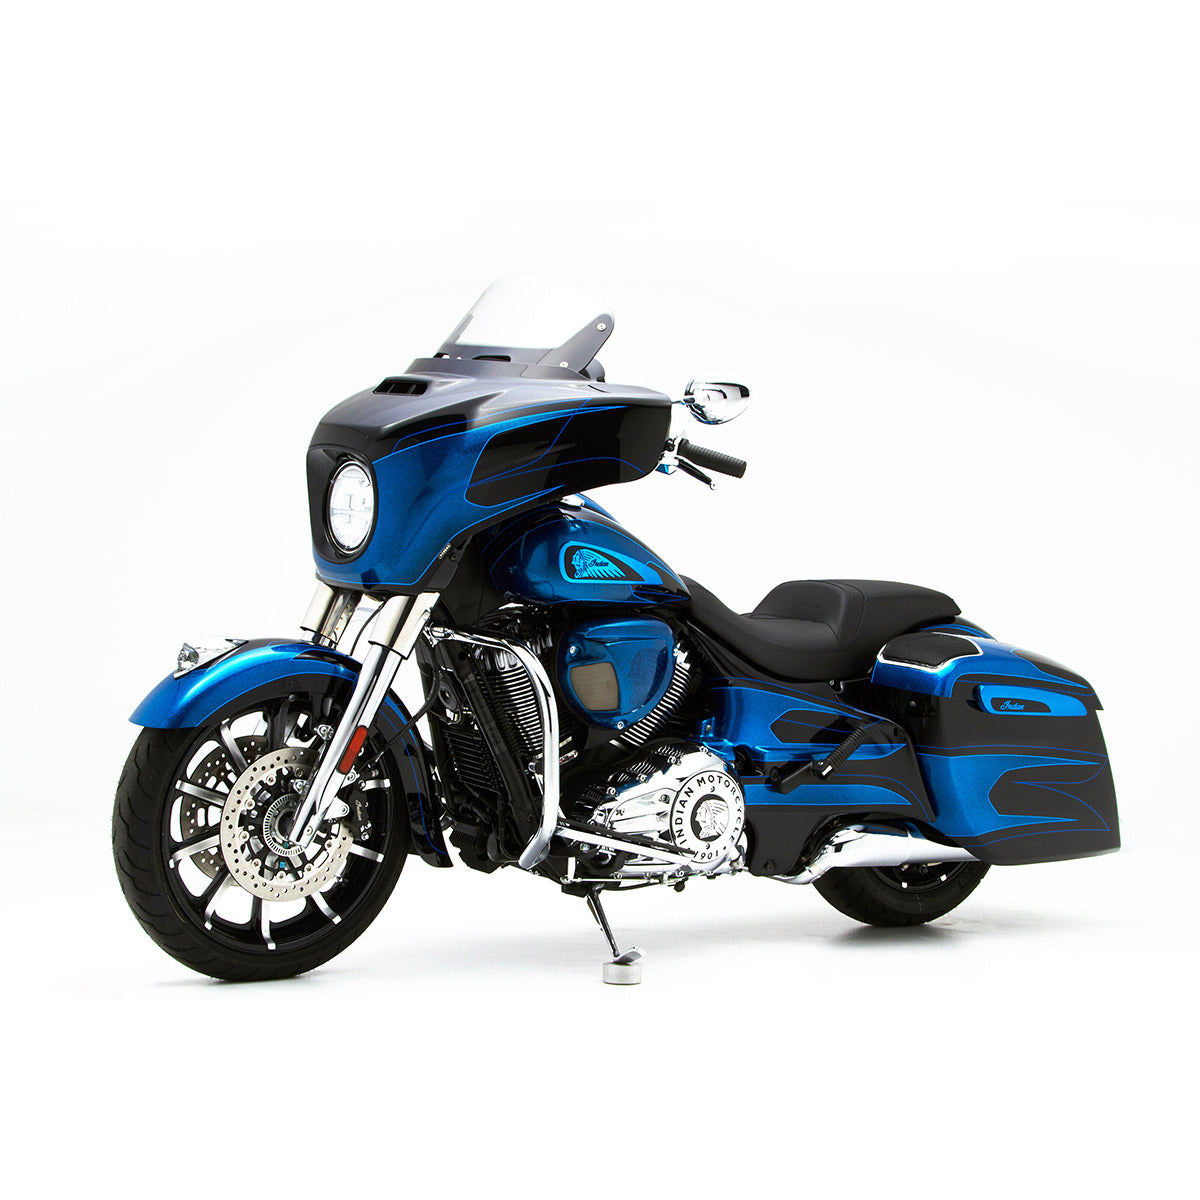 Reytelo Side Covers for Indian® 2019-2023 Chieftain Ltd, Dark Horse, Roadmaster, Springfield Motorcycles shown on 2019 Chieftain(Shown on 2019 Chieftain)